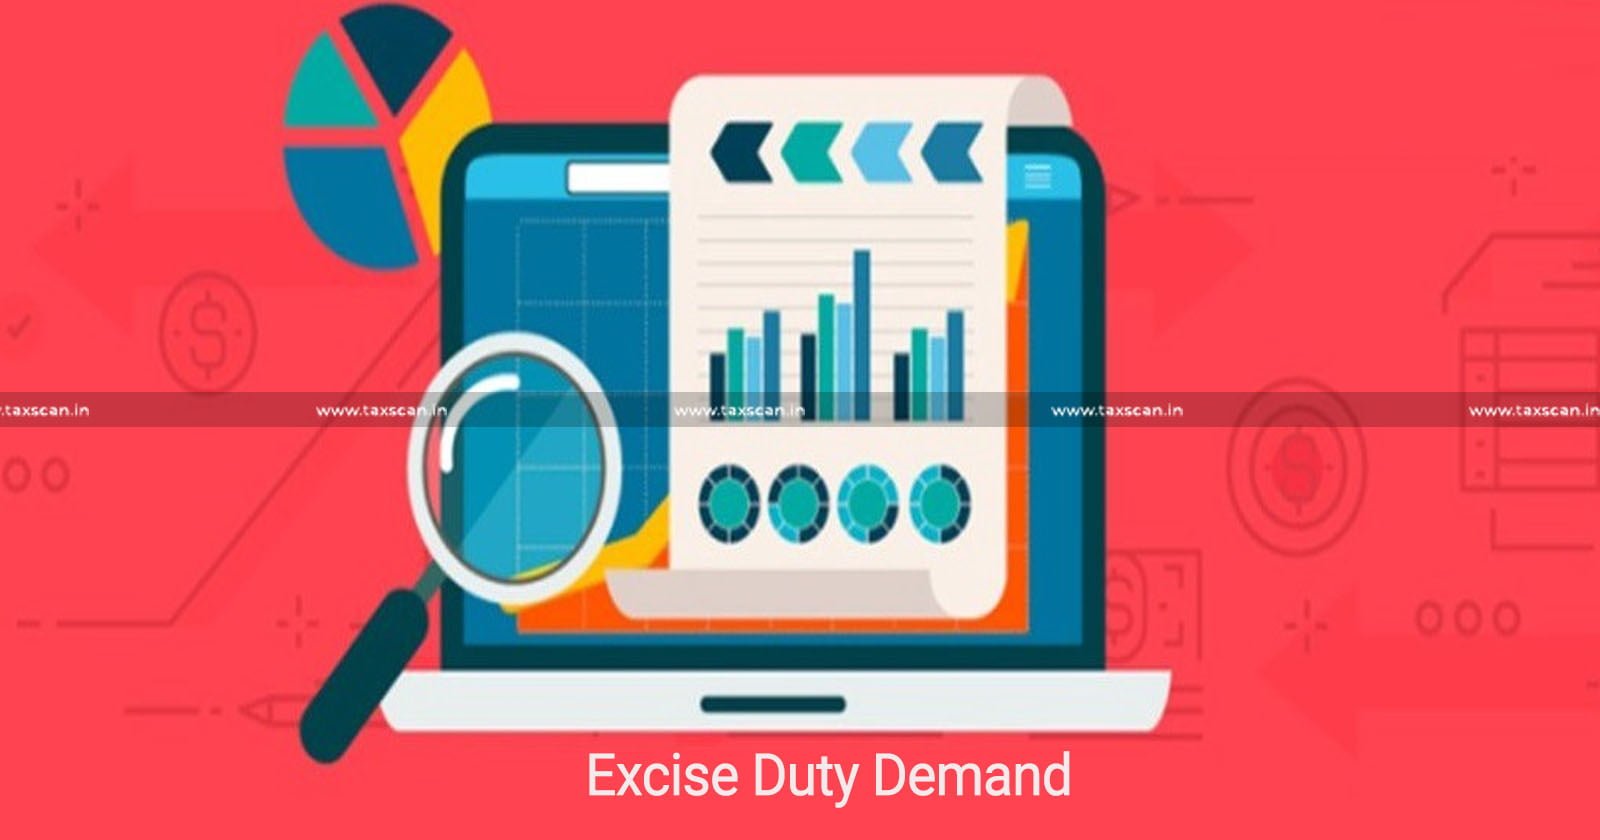 CESTAT quashes Excise Duty Demand - Excise Duty Demand - Cenvated Inputs in Processing on Job Work Undertaken - Job Work Undertaken -Cenvated Inputs - taxscan